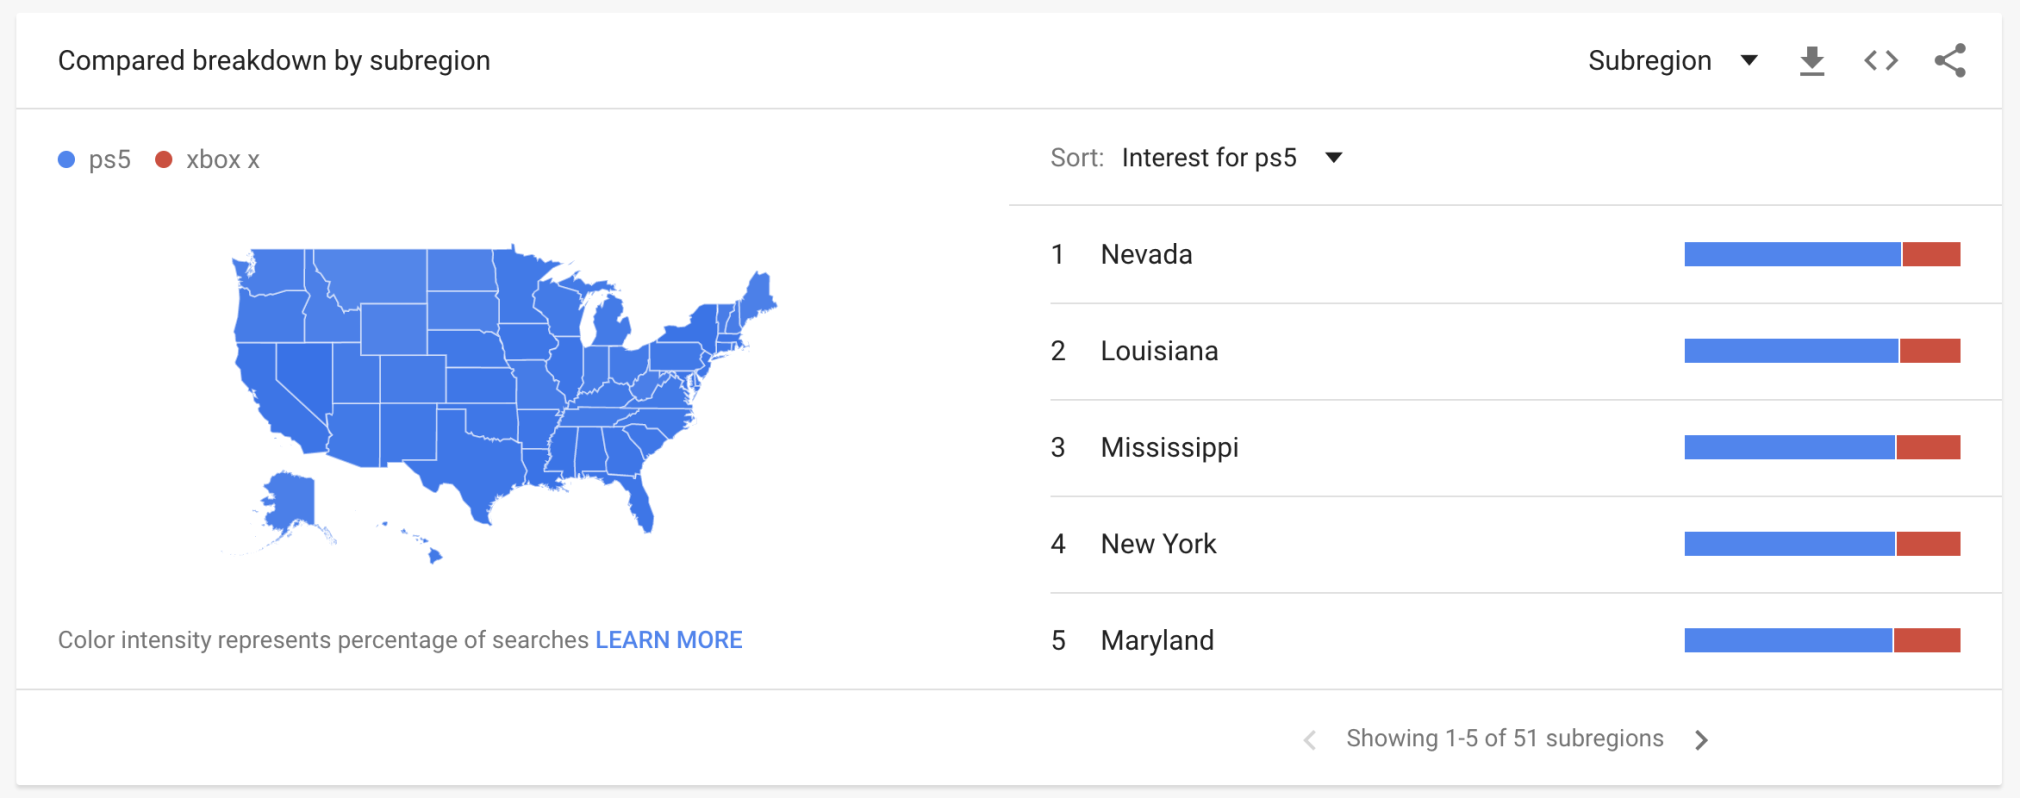 PS5 vs. Xbox X by subregion in Google Trends